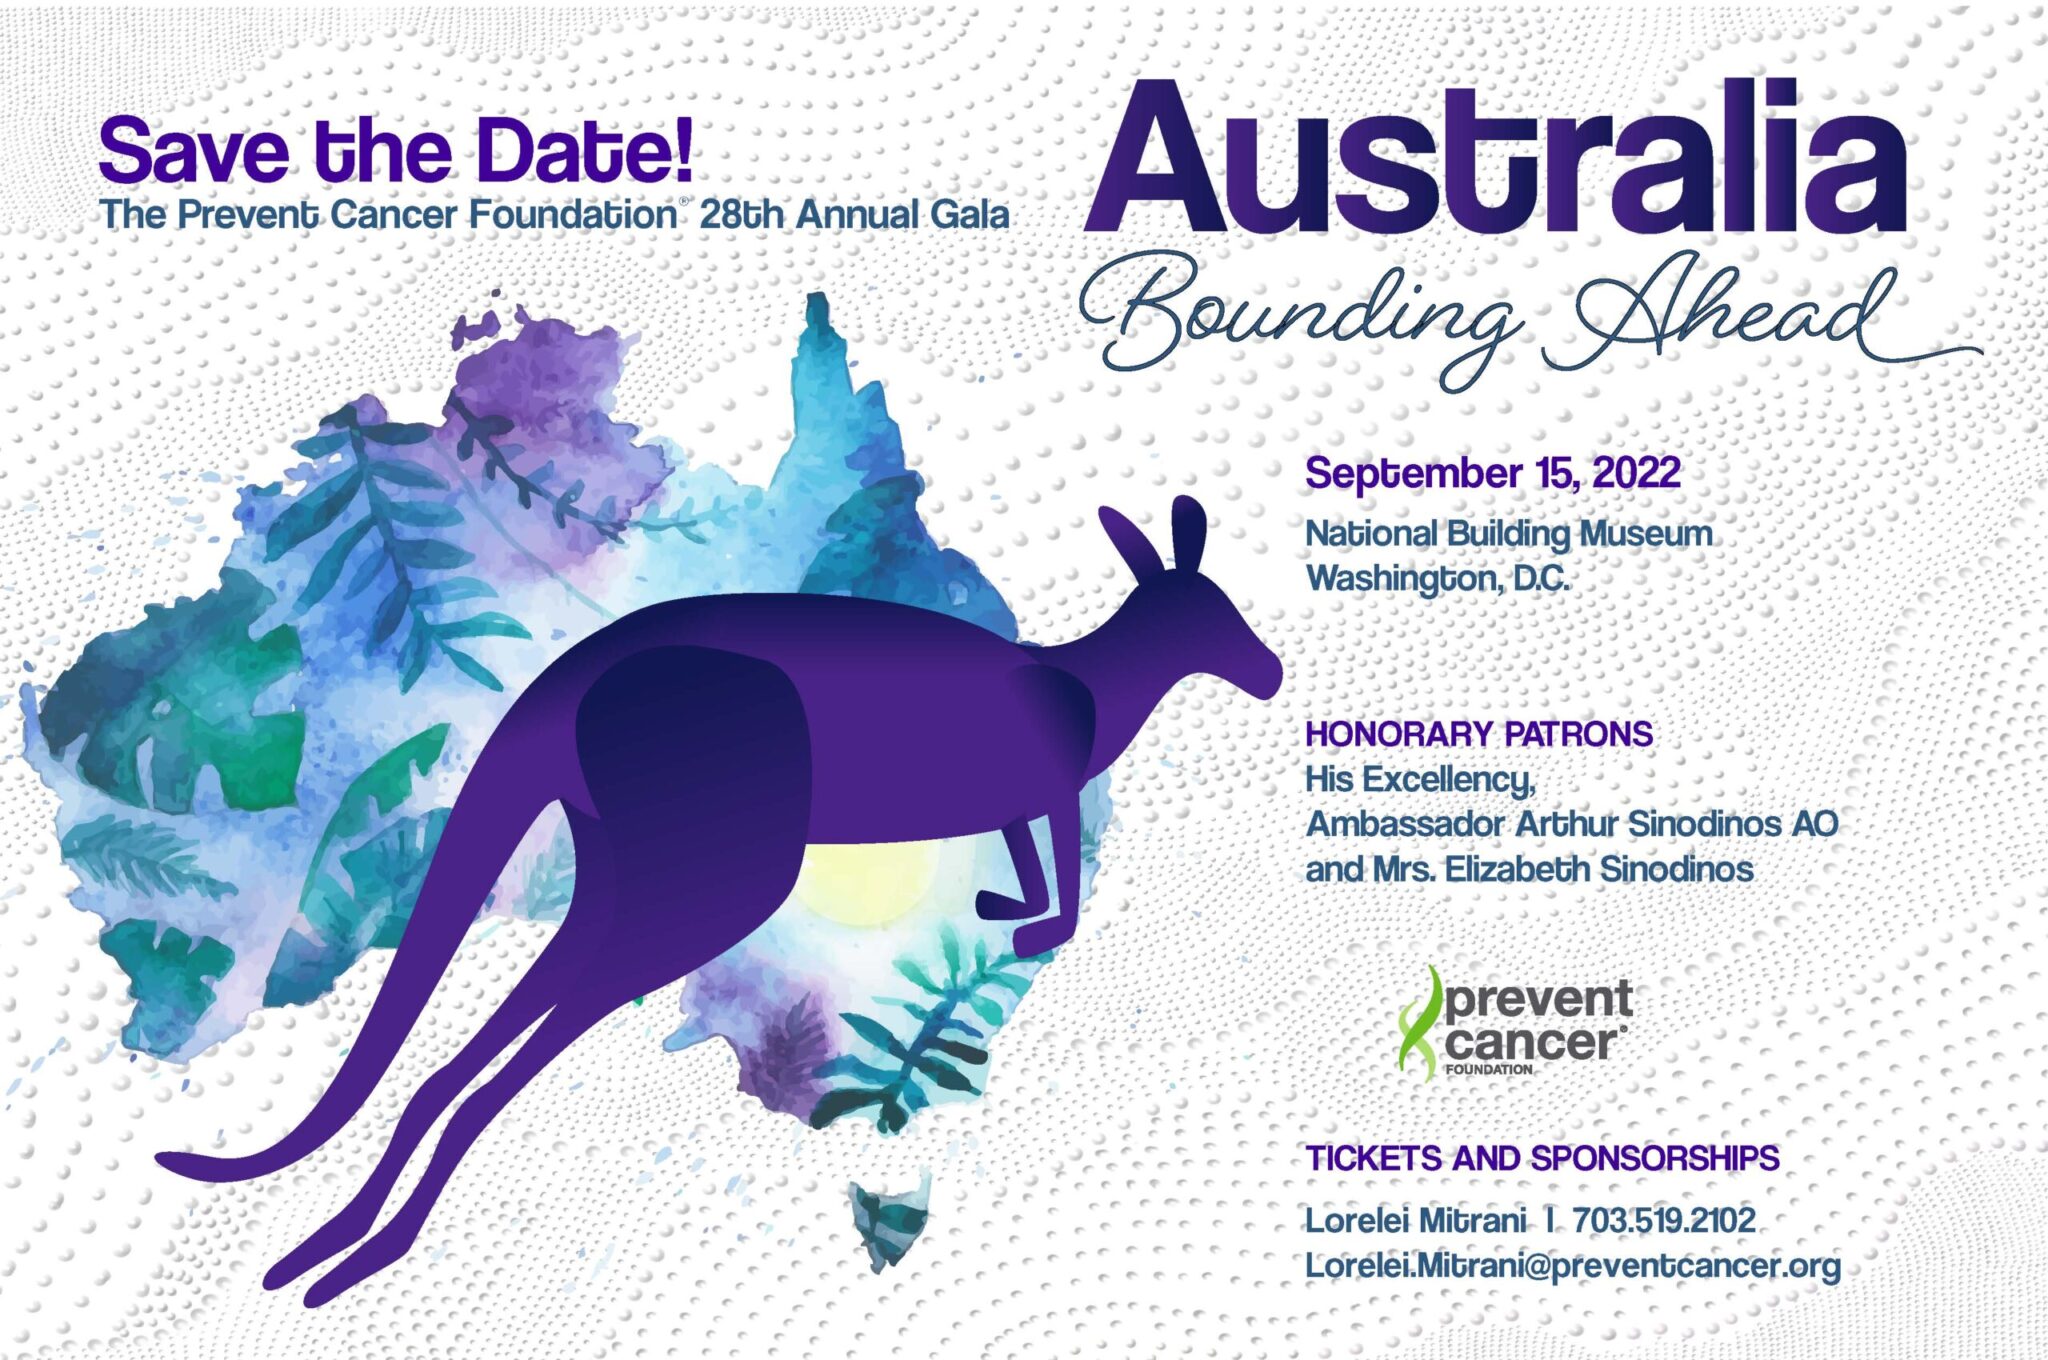 Australia - Bounding Ahead! | The Prevent Cancer Foundation 28th Annual Gala